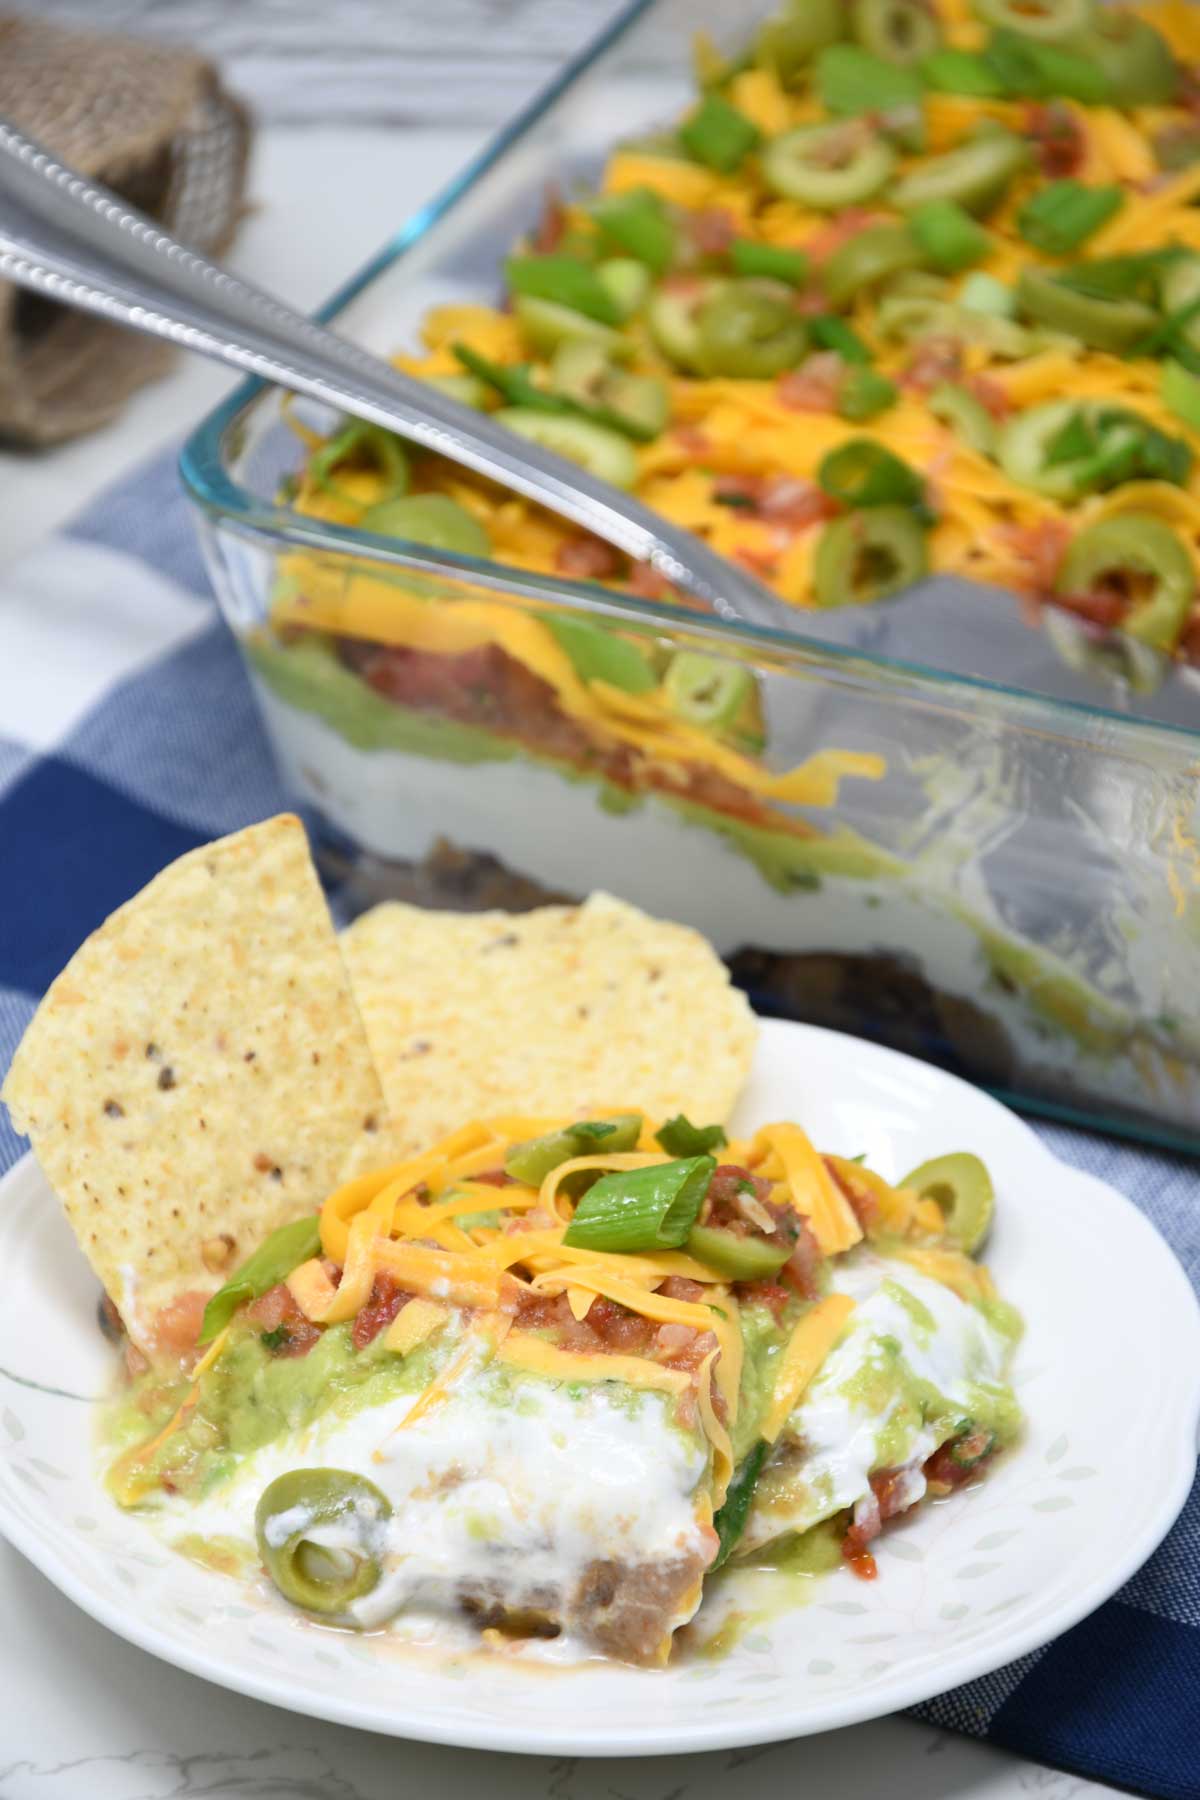 7-layer dip served on a plate with chips.